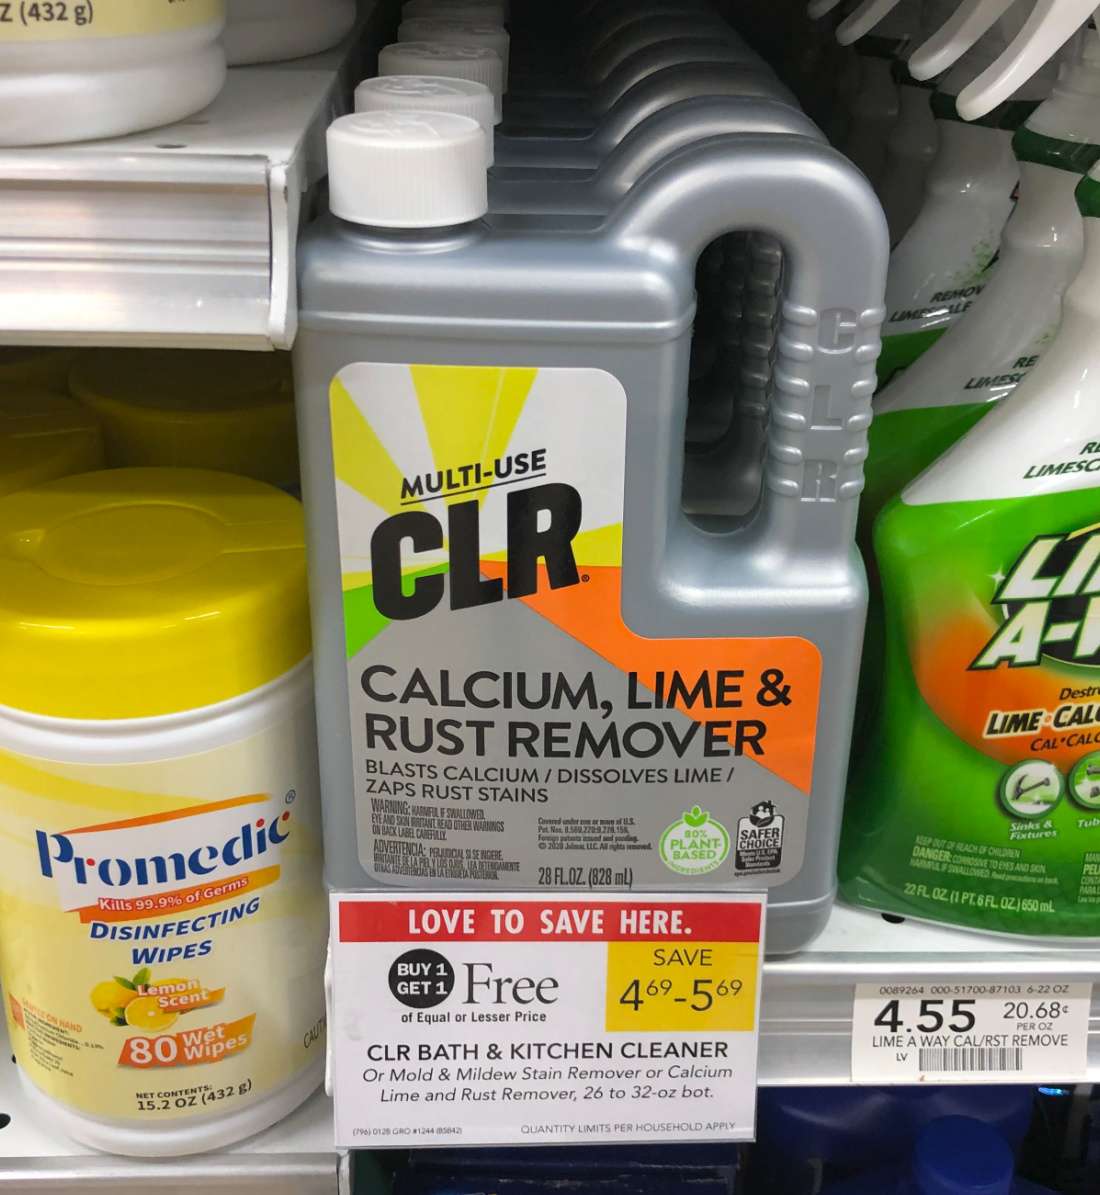 CLR Calcium, Lime & Rust Remover Just $1.85 At Publix (Today Only) on I Heart Publix